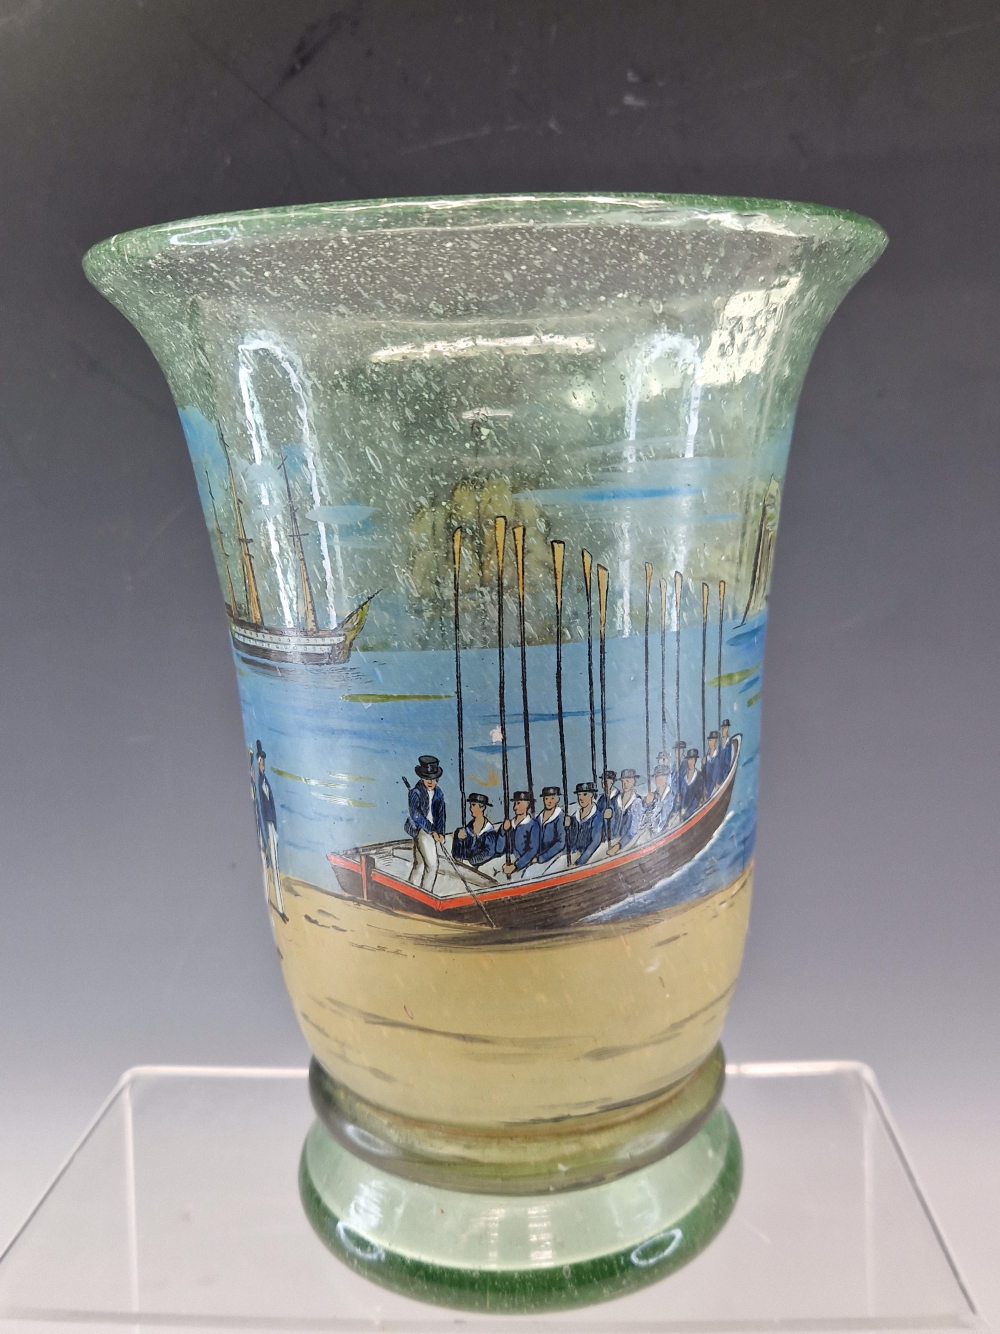 AN EARLY 20th C. GLASS VASE PAINTED WITH 18th C. NAVAL OFFICERS ABOUT TO BE ROWED OUT TO GUN SHIPS - Image 2 of 5